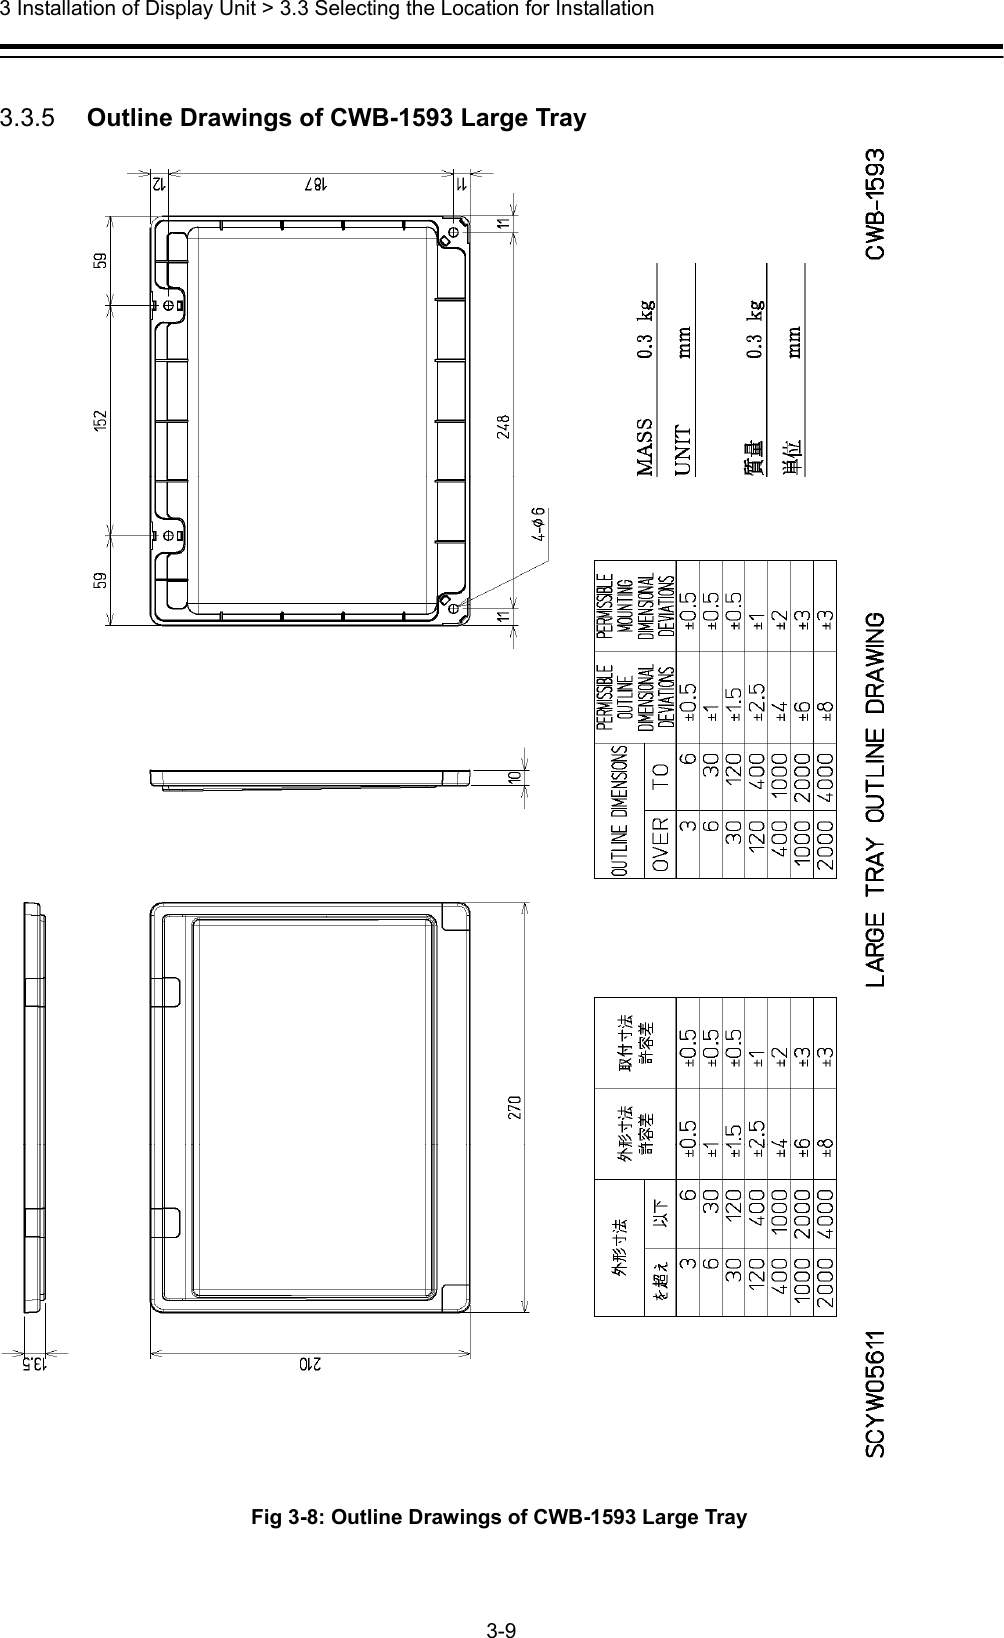  3 Installation of Display Unit &gt; 3.3 Selecting the Location for Installation 3-9   3.3.5   Outline Drawings of CWB-1593 Large Tray  Fig 3-8: Outline Drawings of CWB-1593 Large Tray 